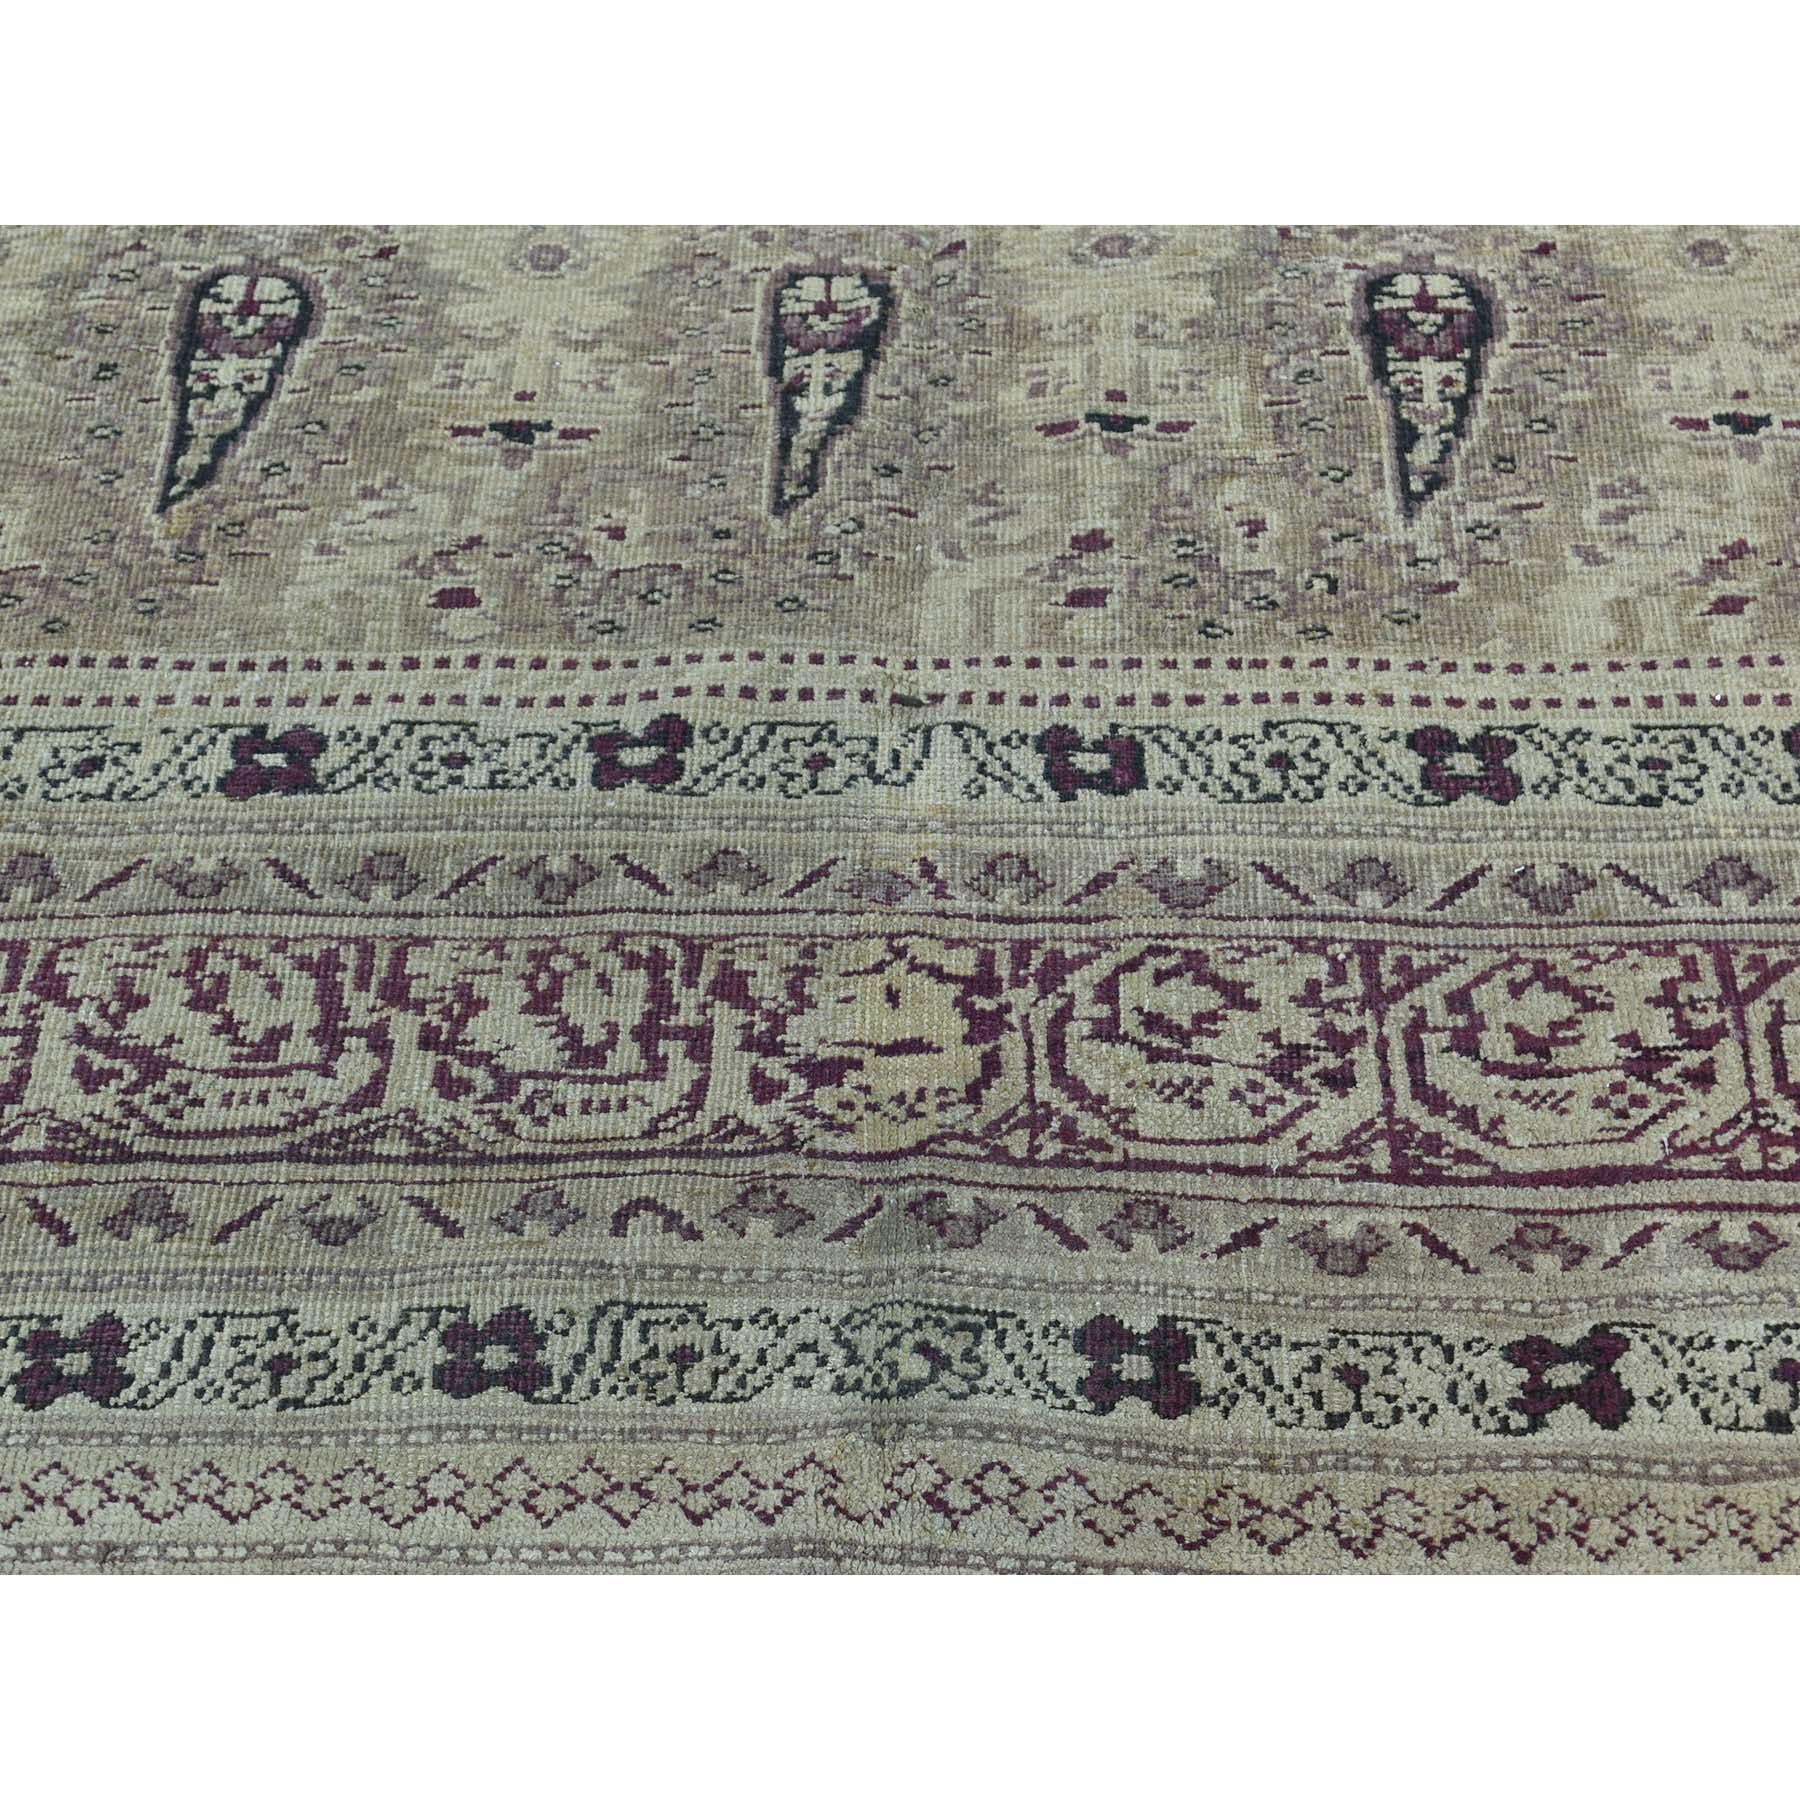 Antique Mughal Agra Paisley Design Excellent Condition Rug 1